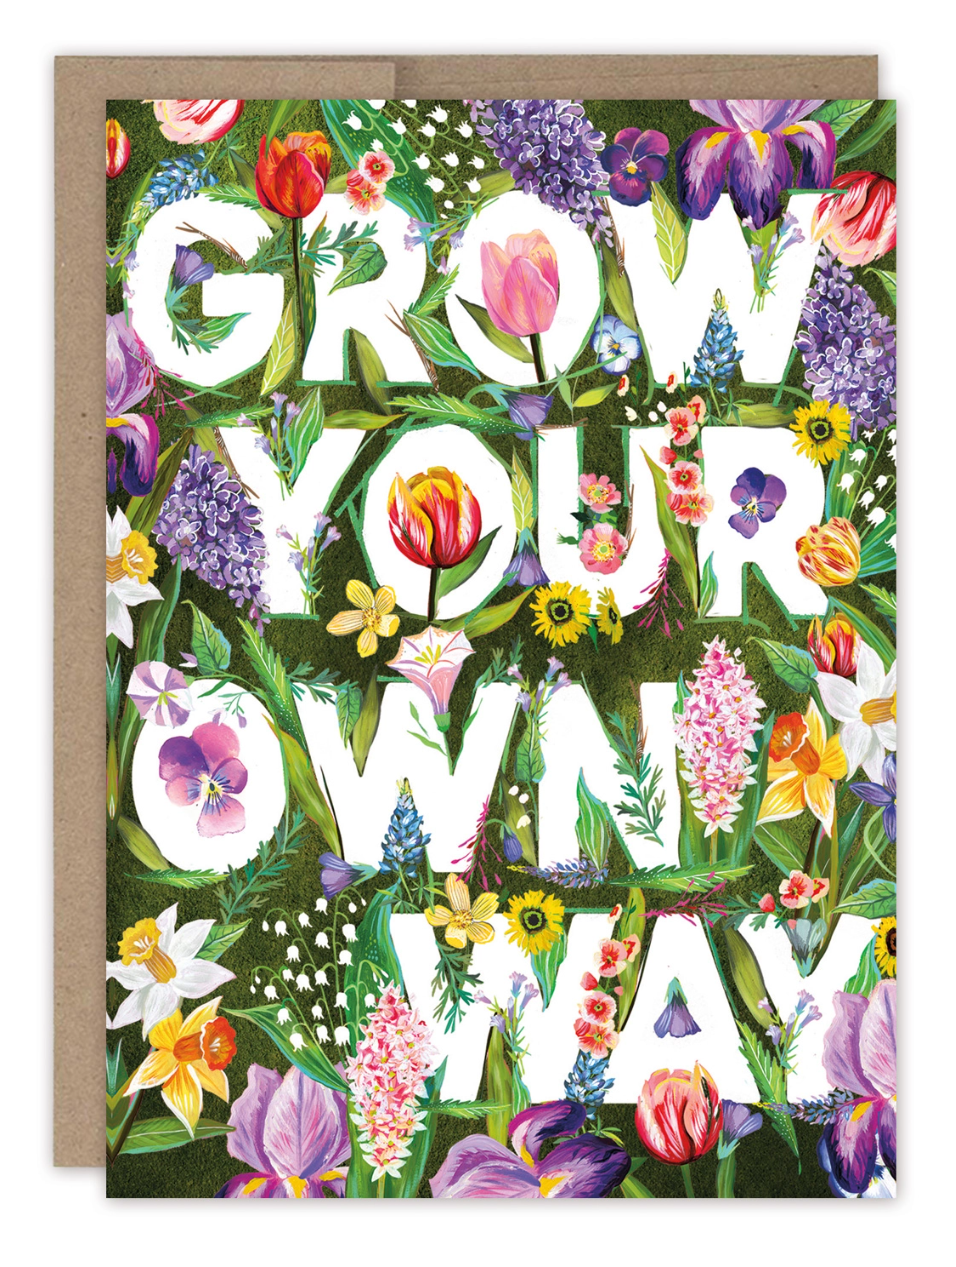 •GROW YOUR OWN WAY• birthday card